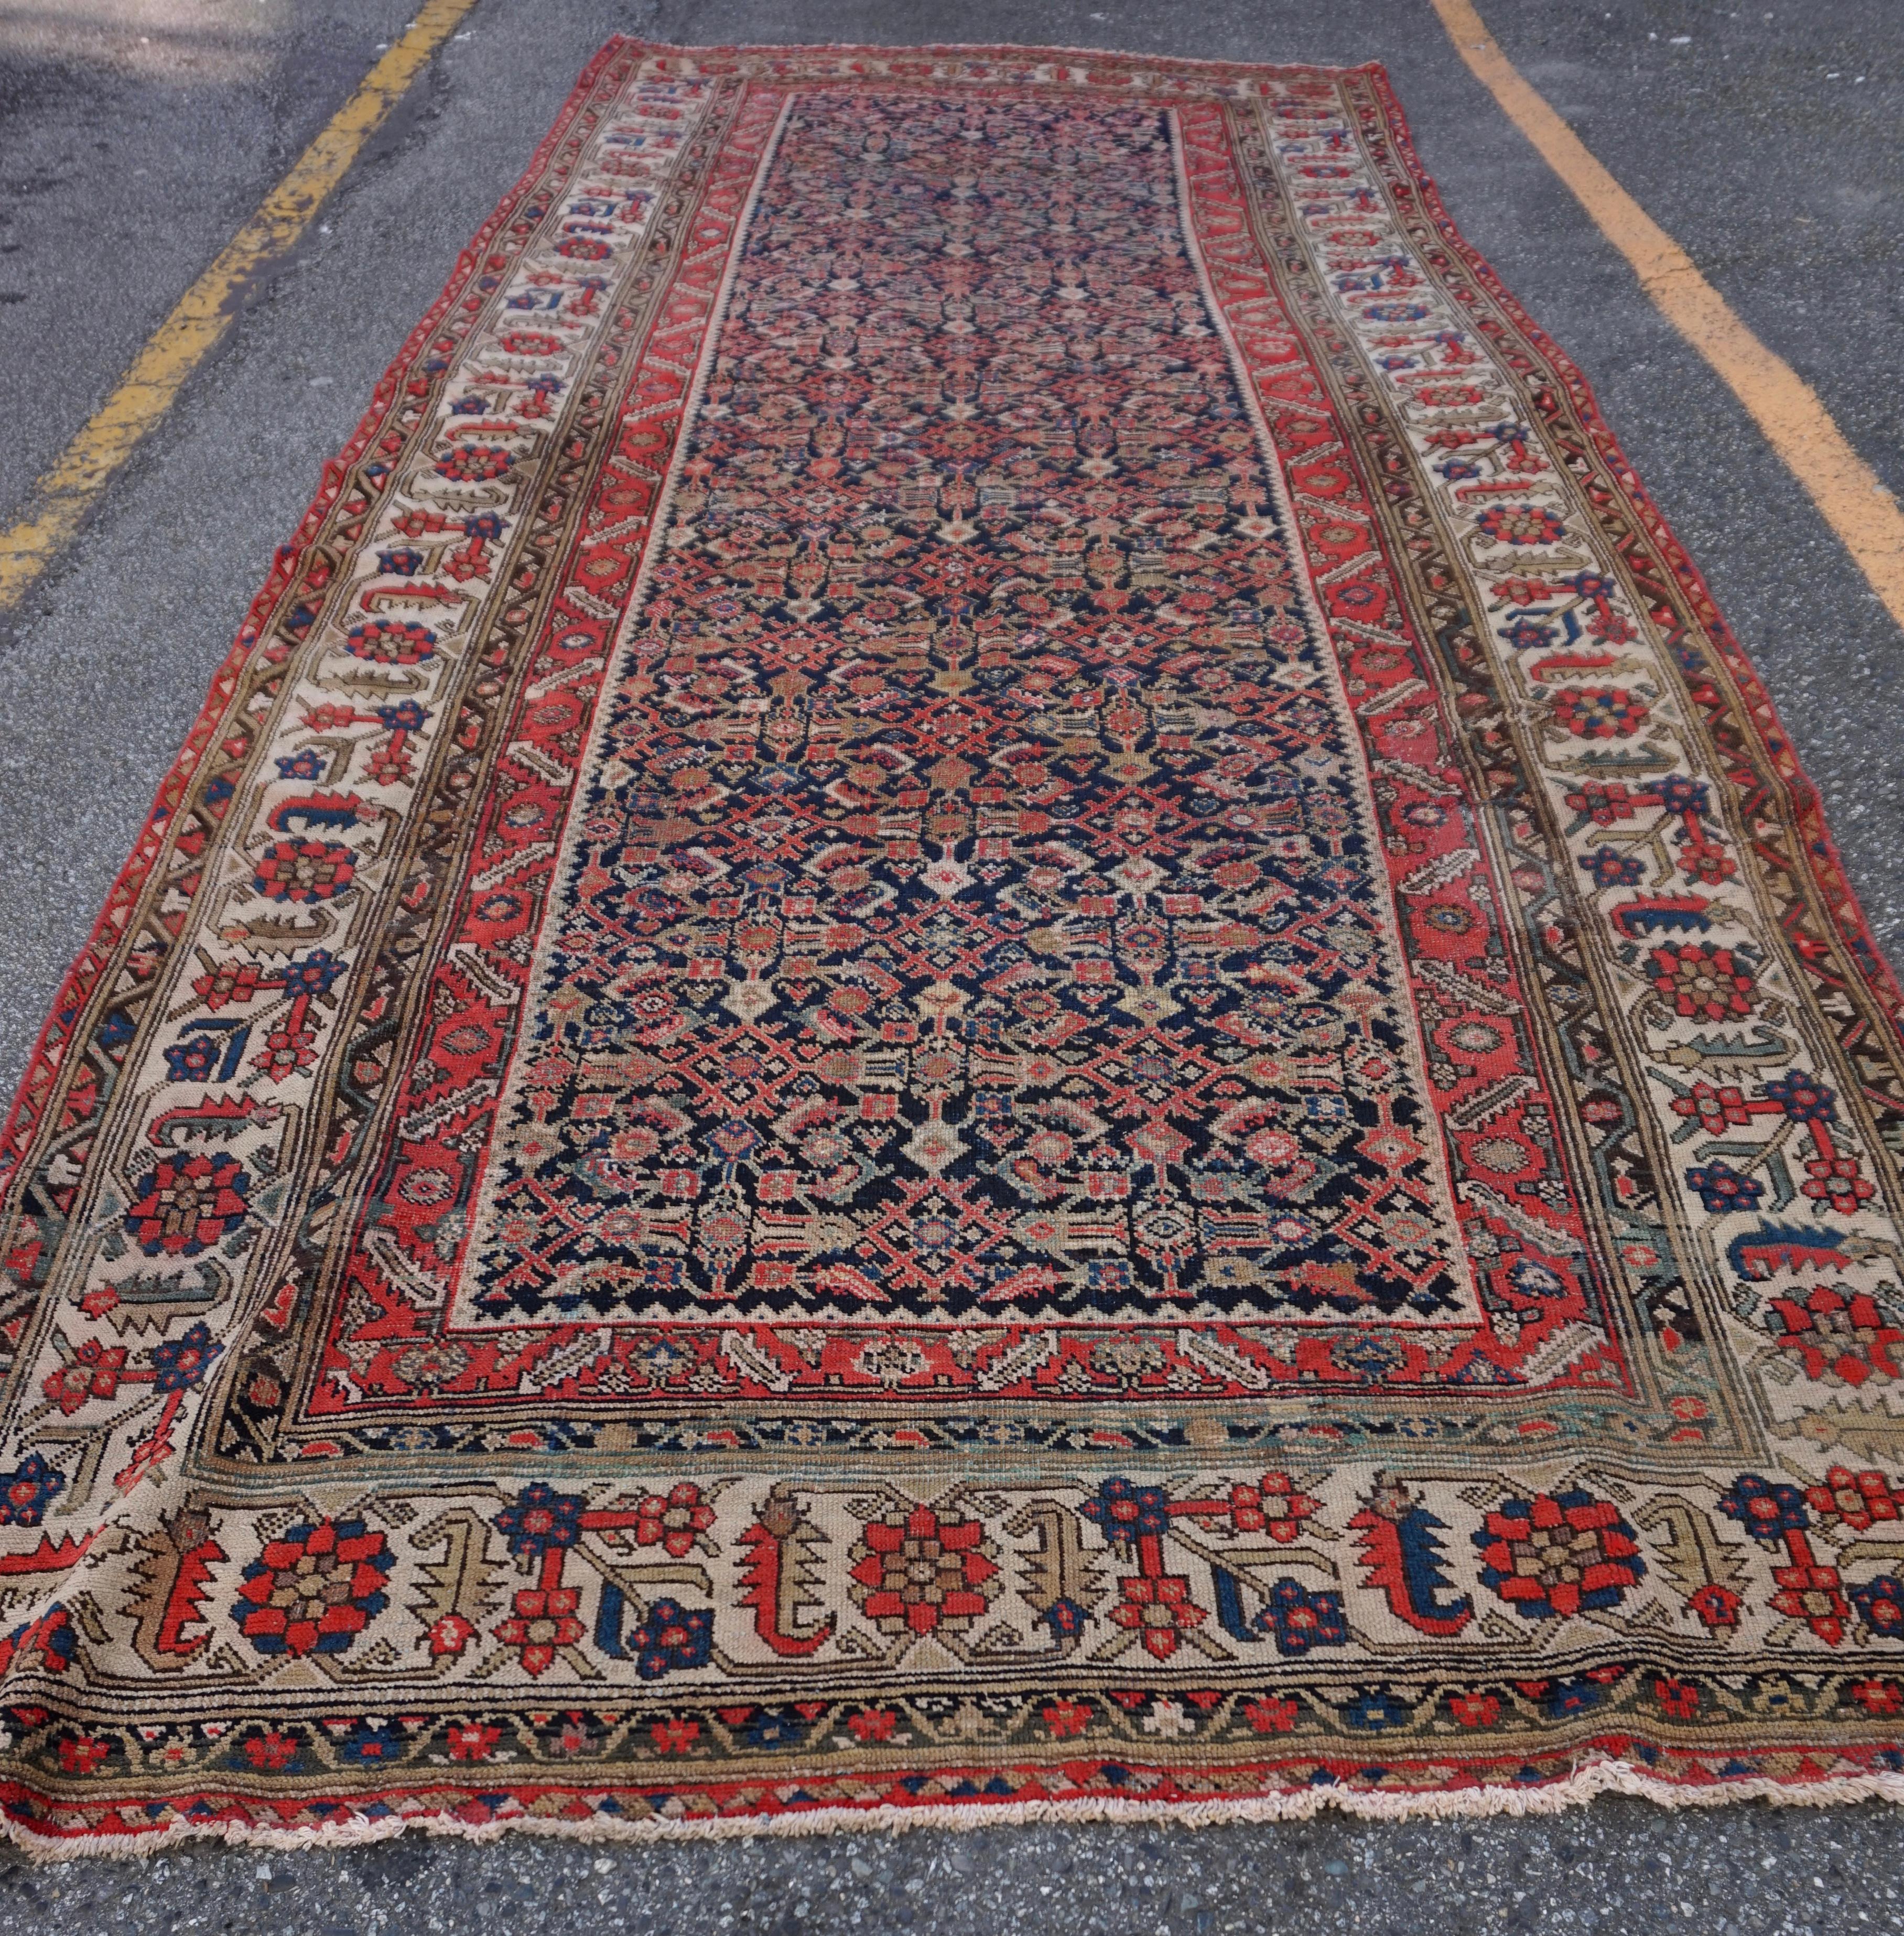 Circa 1890-1900

Herati design North West Kurdish Rug hand knotted in beautiful matted hues. Likely custom woven for a stately hallway or foyer. Intact and in good overall condition with minor repair. Sturdy with excellent character and life left to